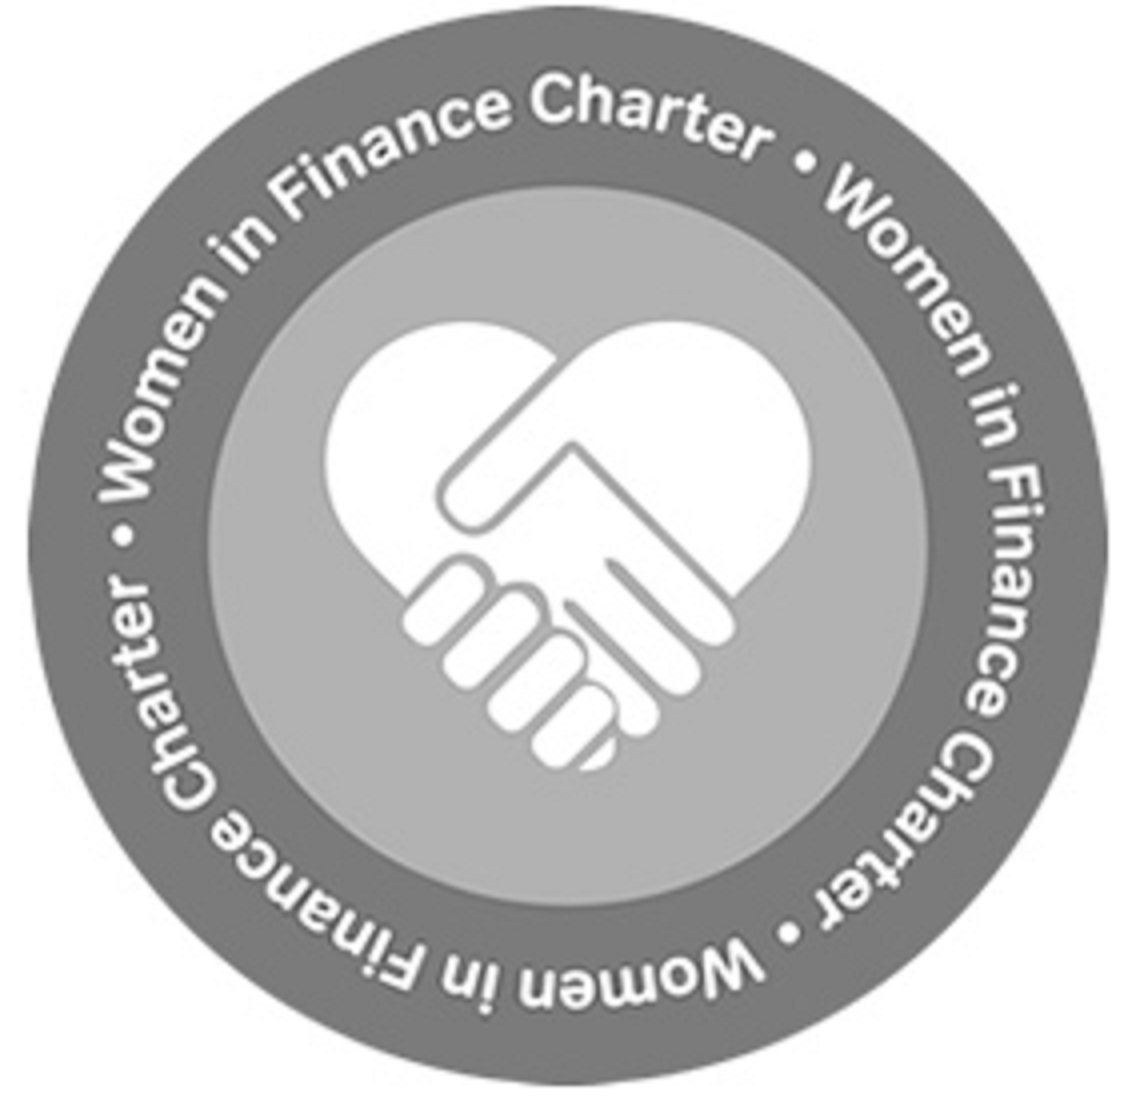 A pledge for gender balance in Financial Services award